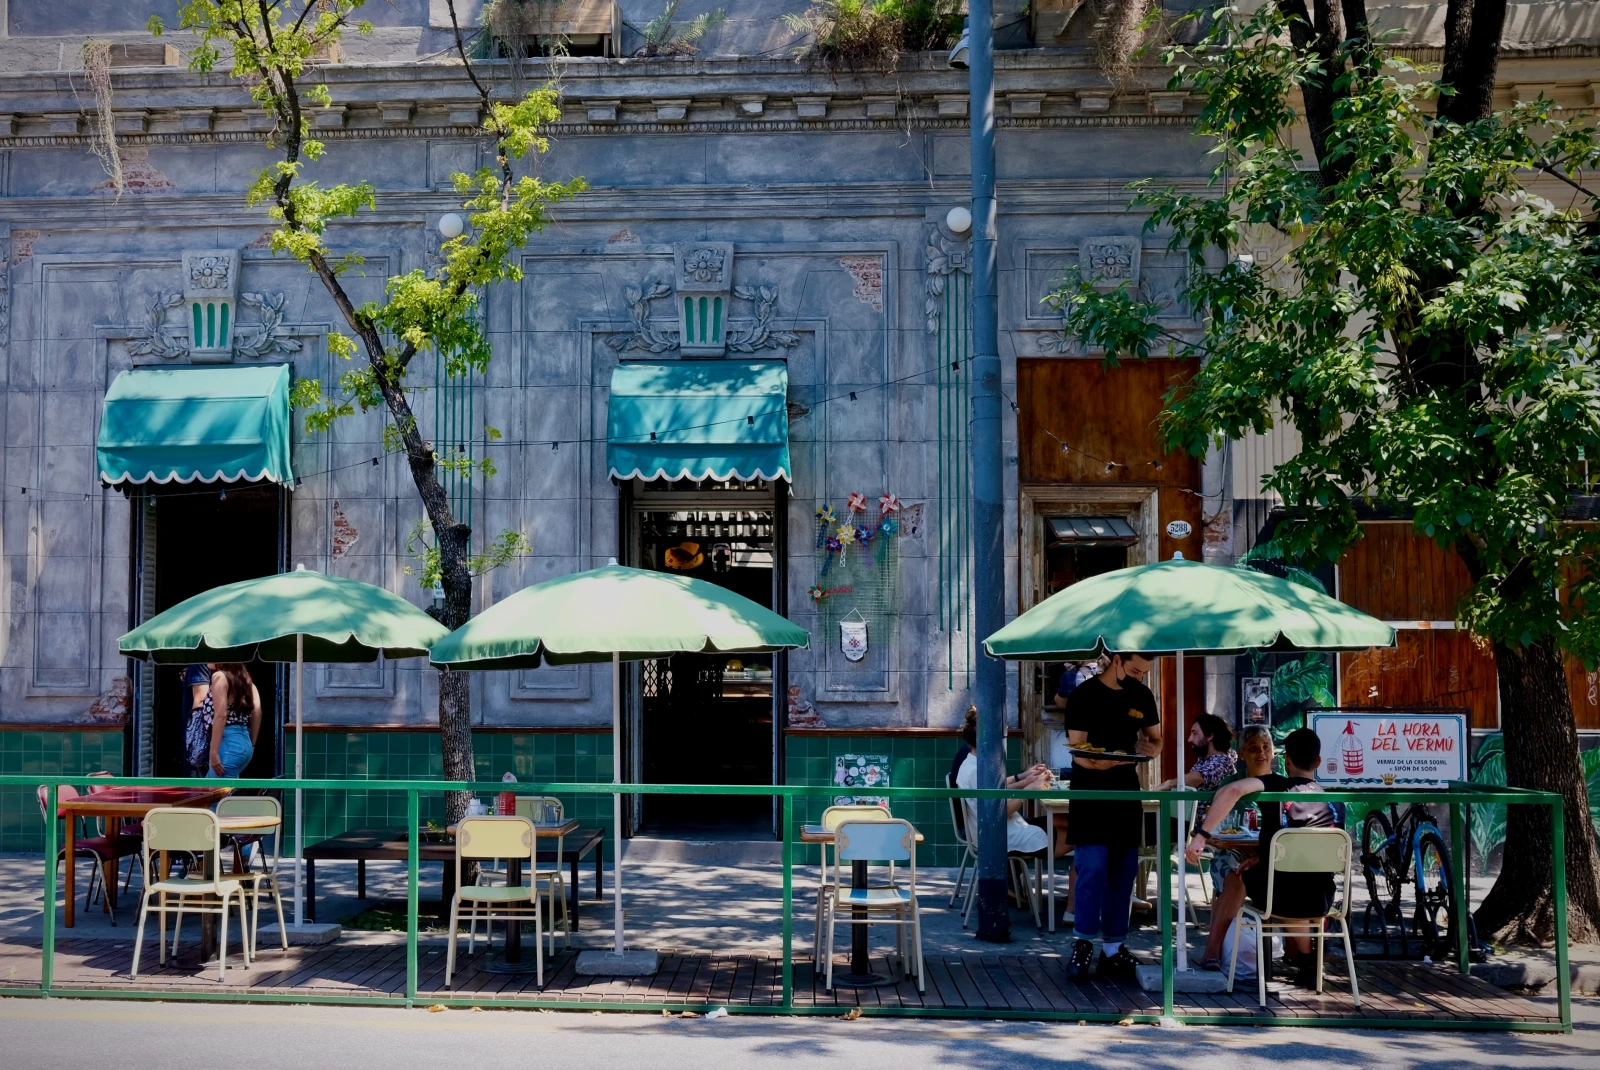 Green umbrellas and chairs on the sidewalk outside of a restaurant